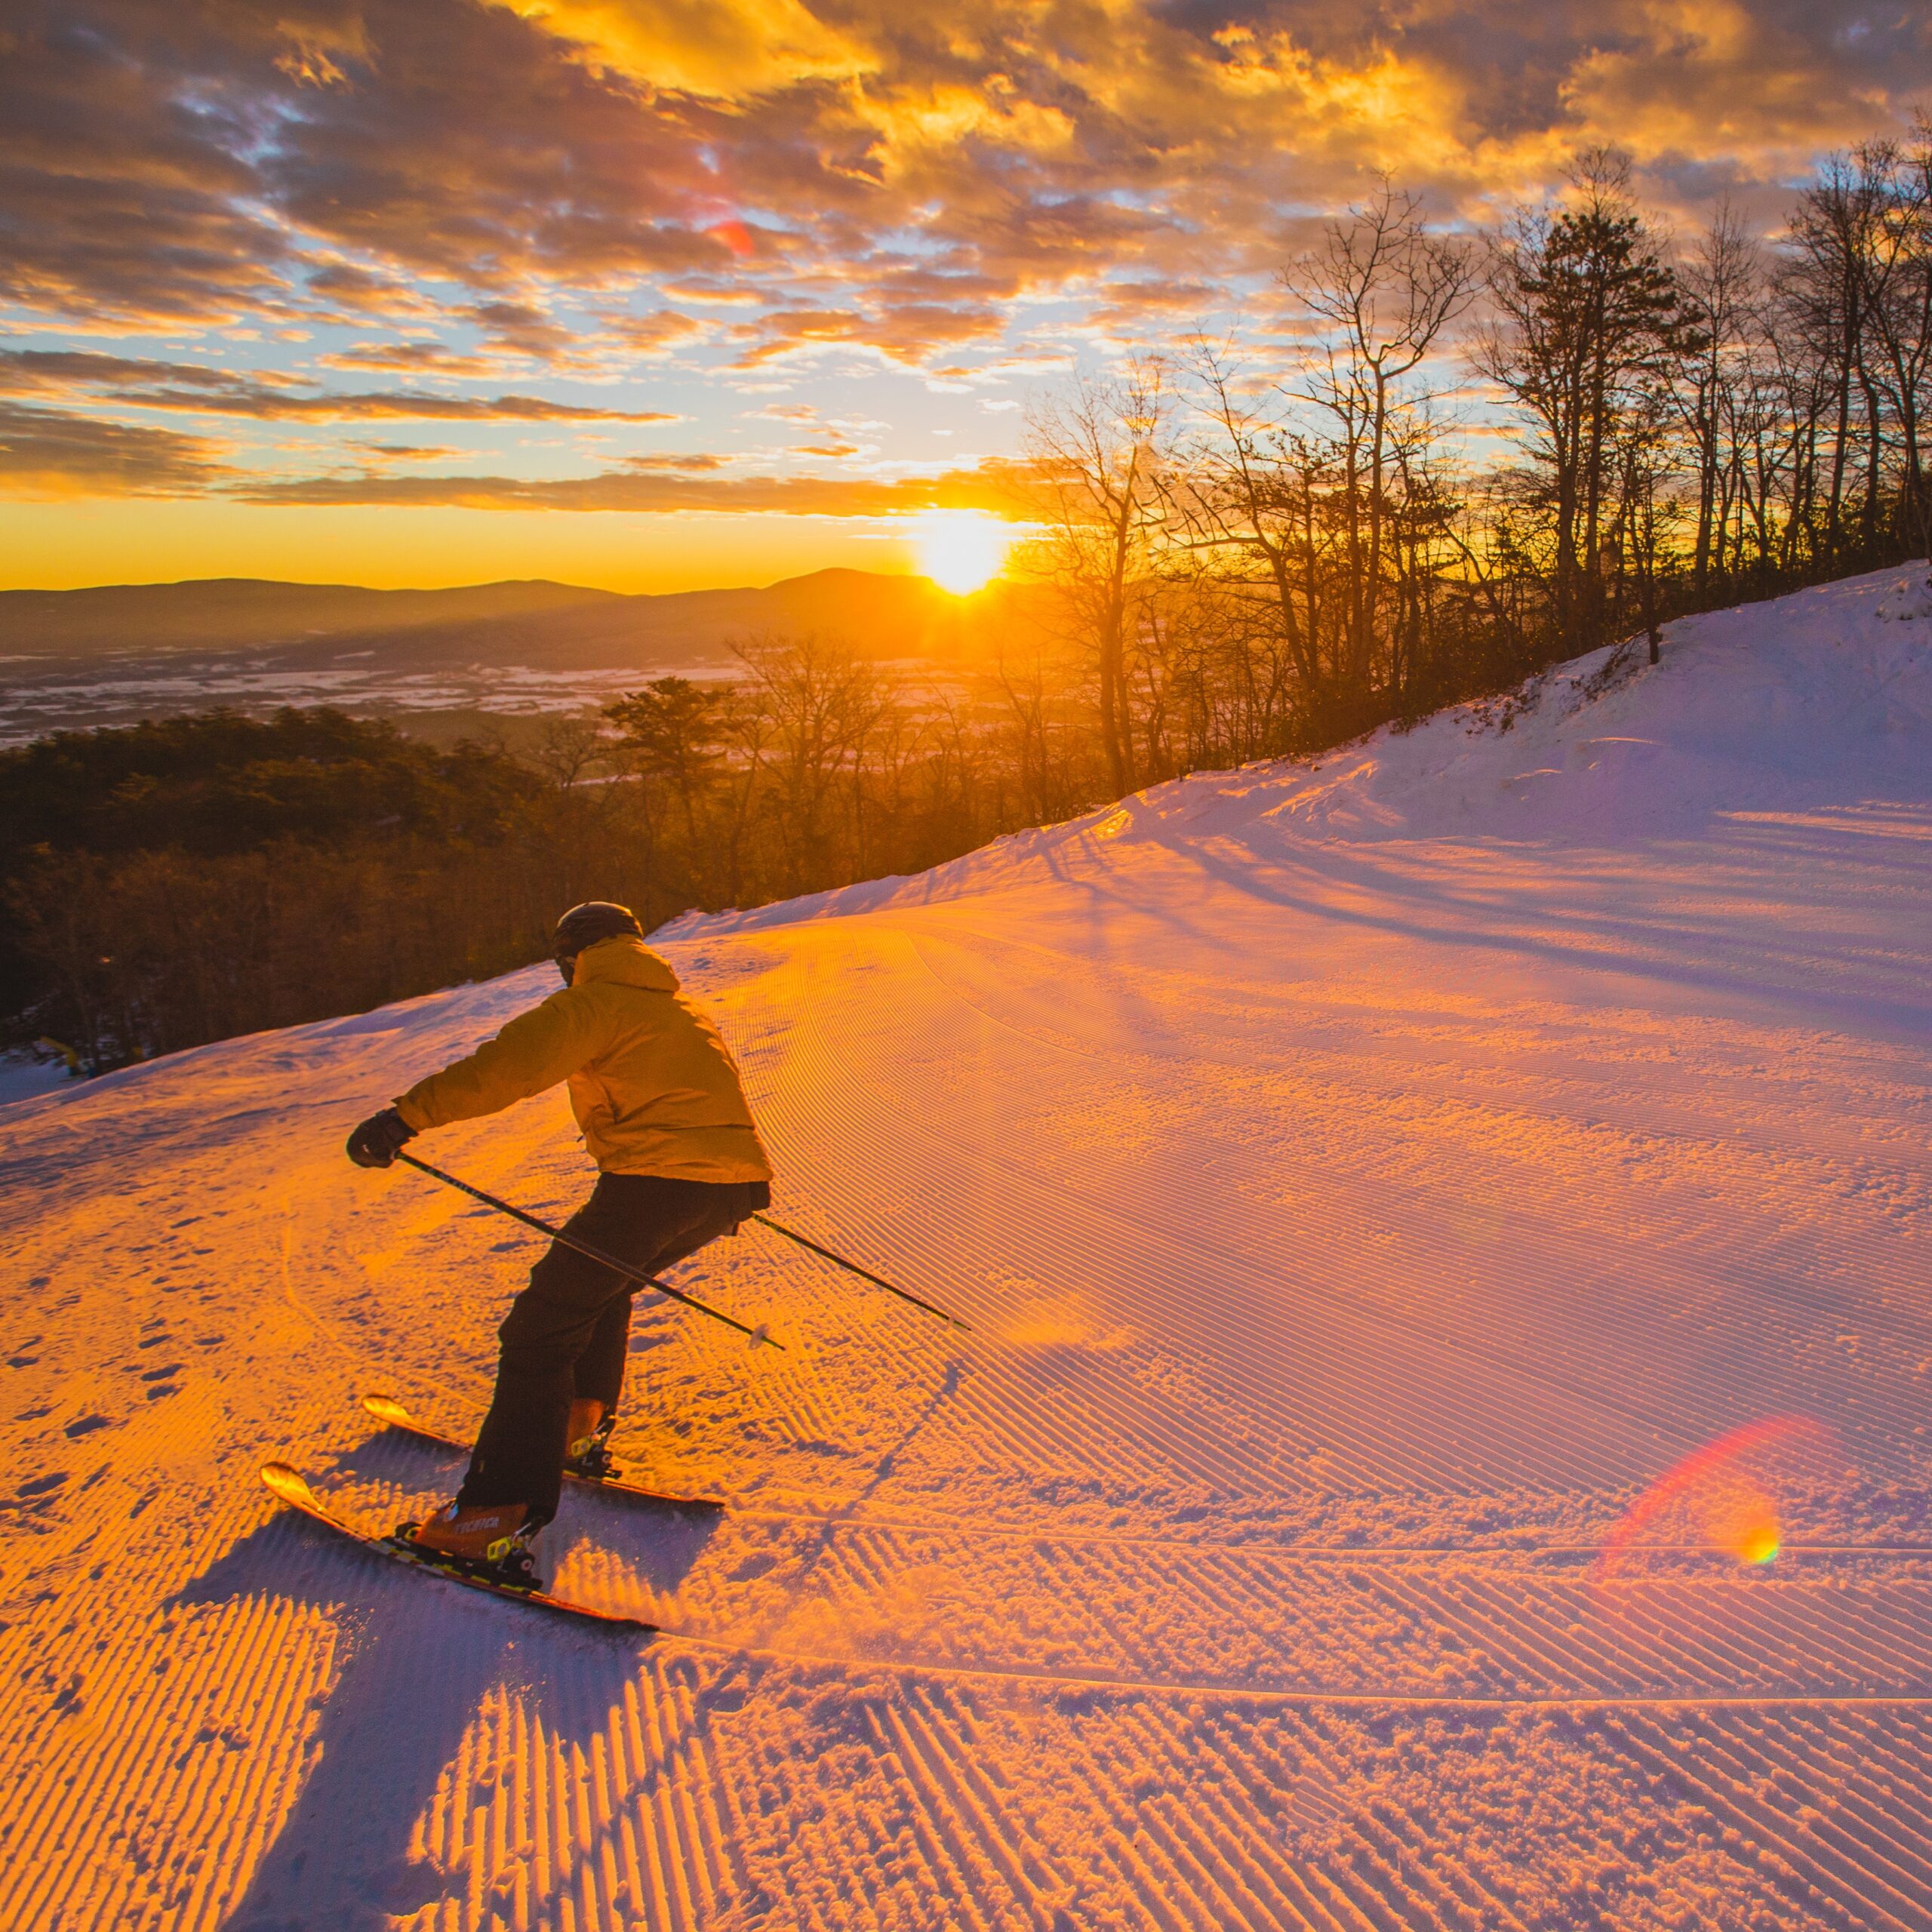 A photo of someone skiiing down a hill at sunset at Massanutten Resort.